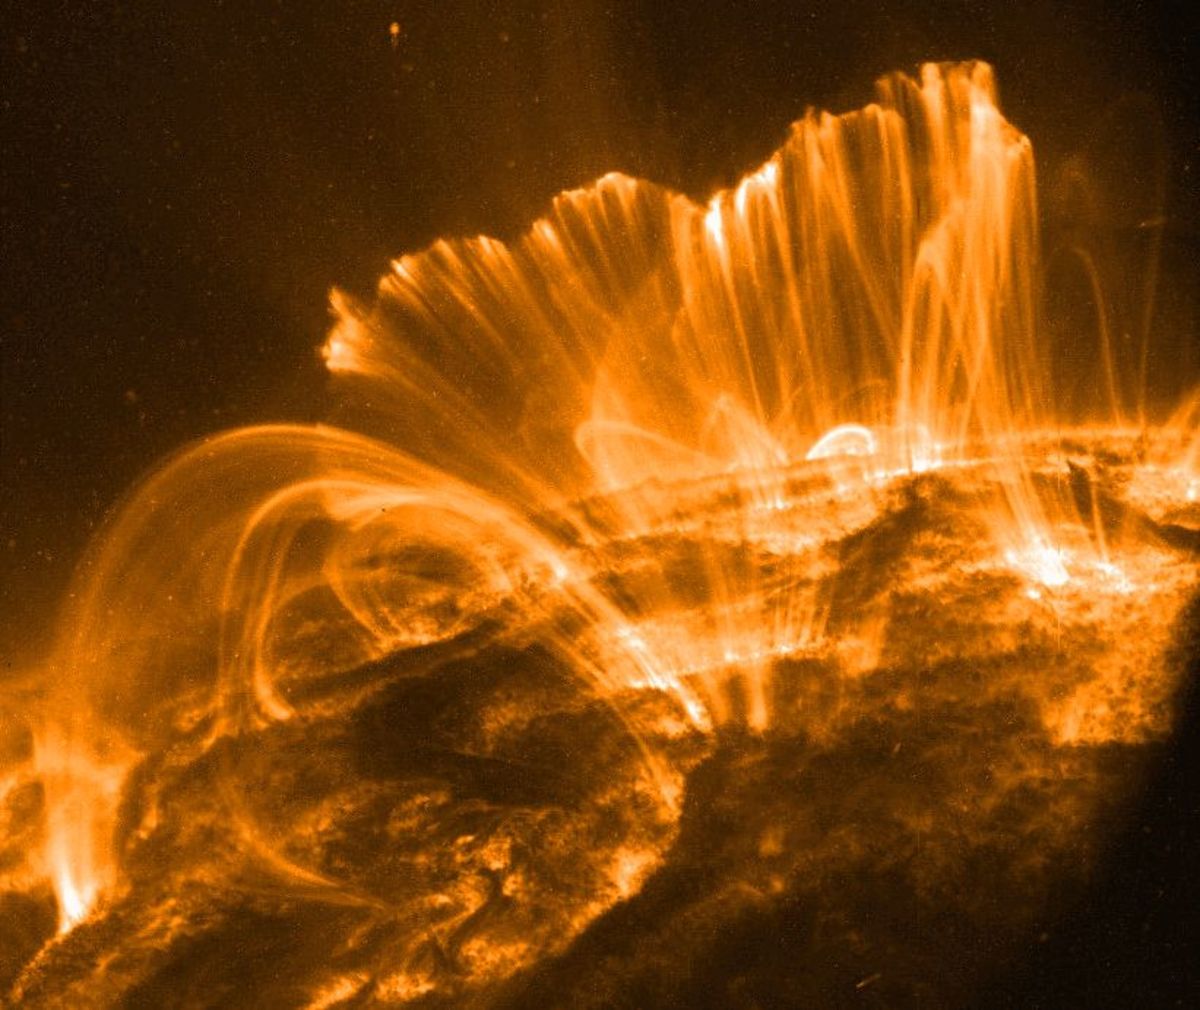 A tech-destroying solar flare could hit Earth within 100 years